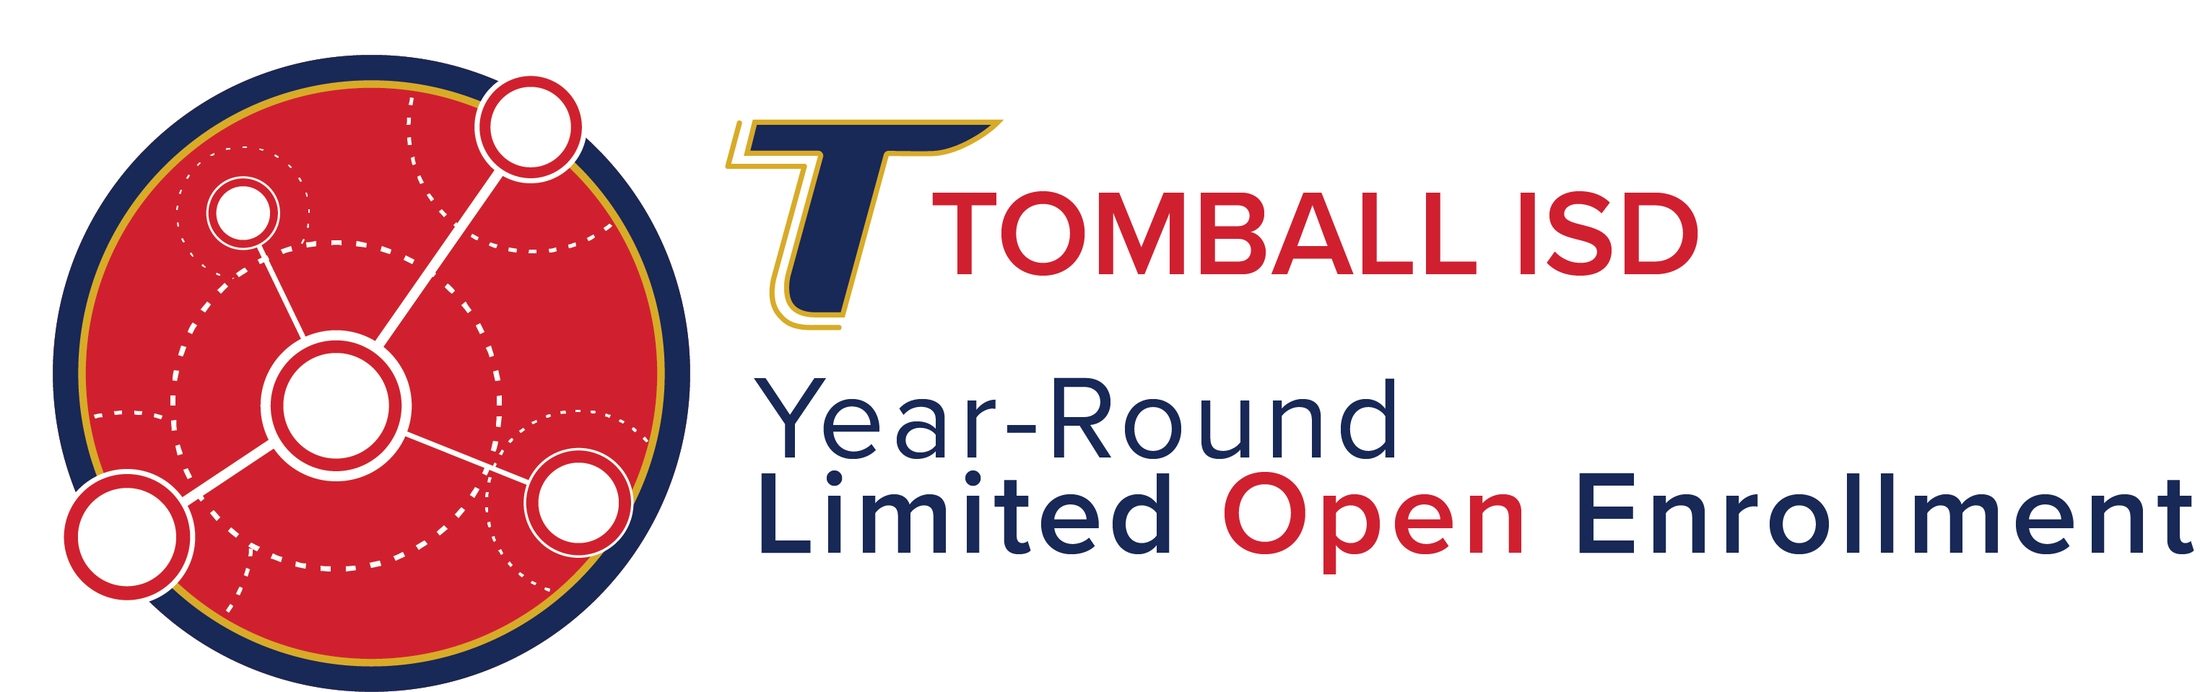 Limited Open Enrollment - Administrative Services - Tomball Extraordinary School Calendar Tomball Isd